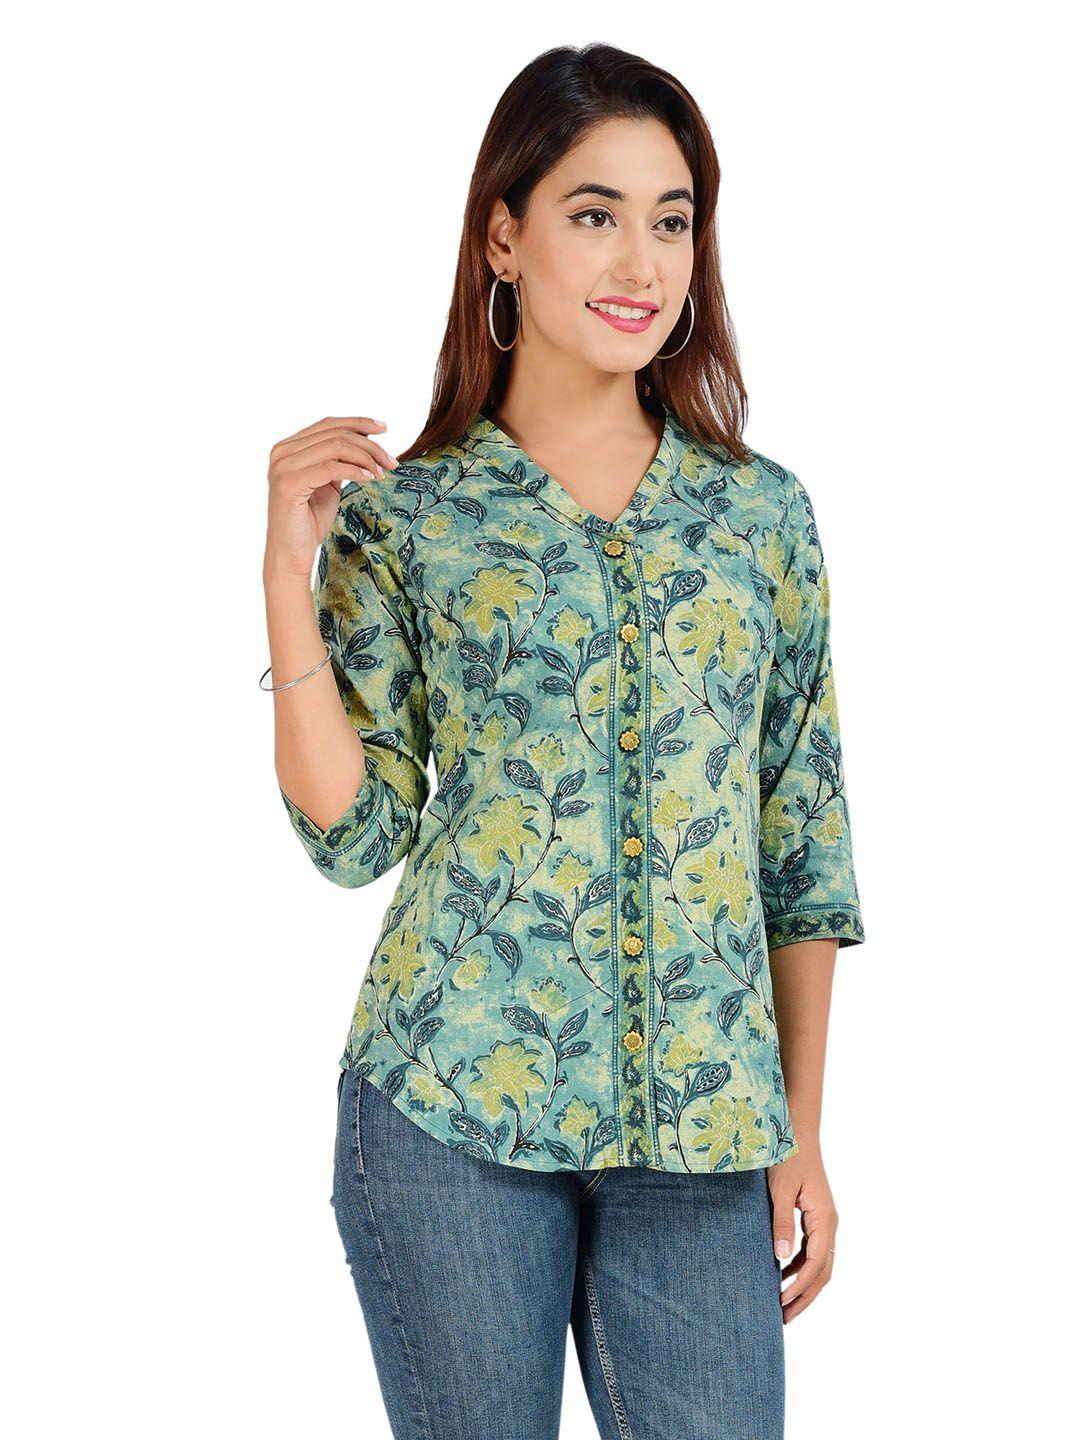 cotland fashion floral printed pure cotton shirt style top